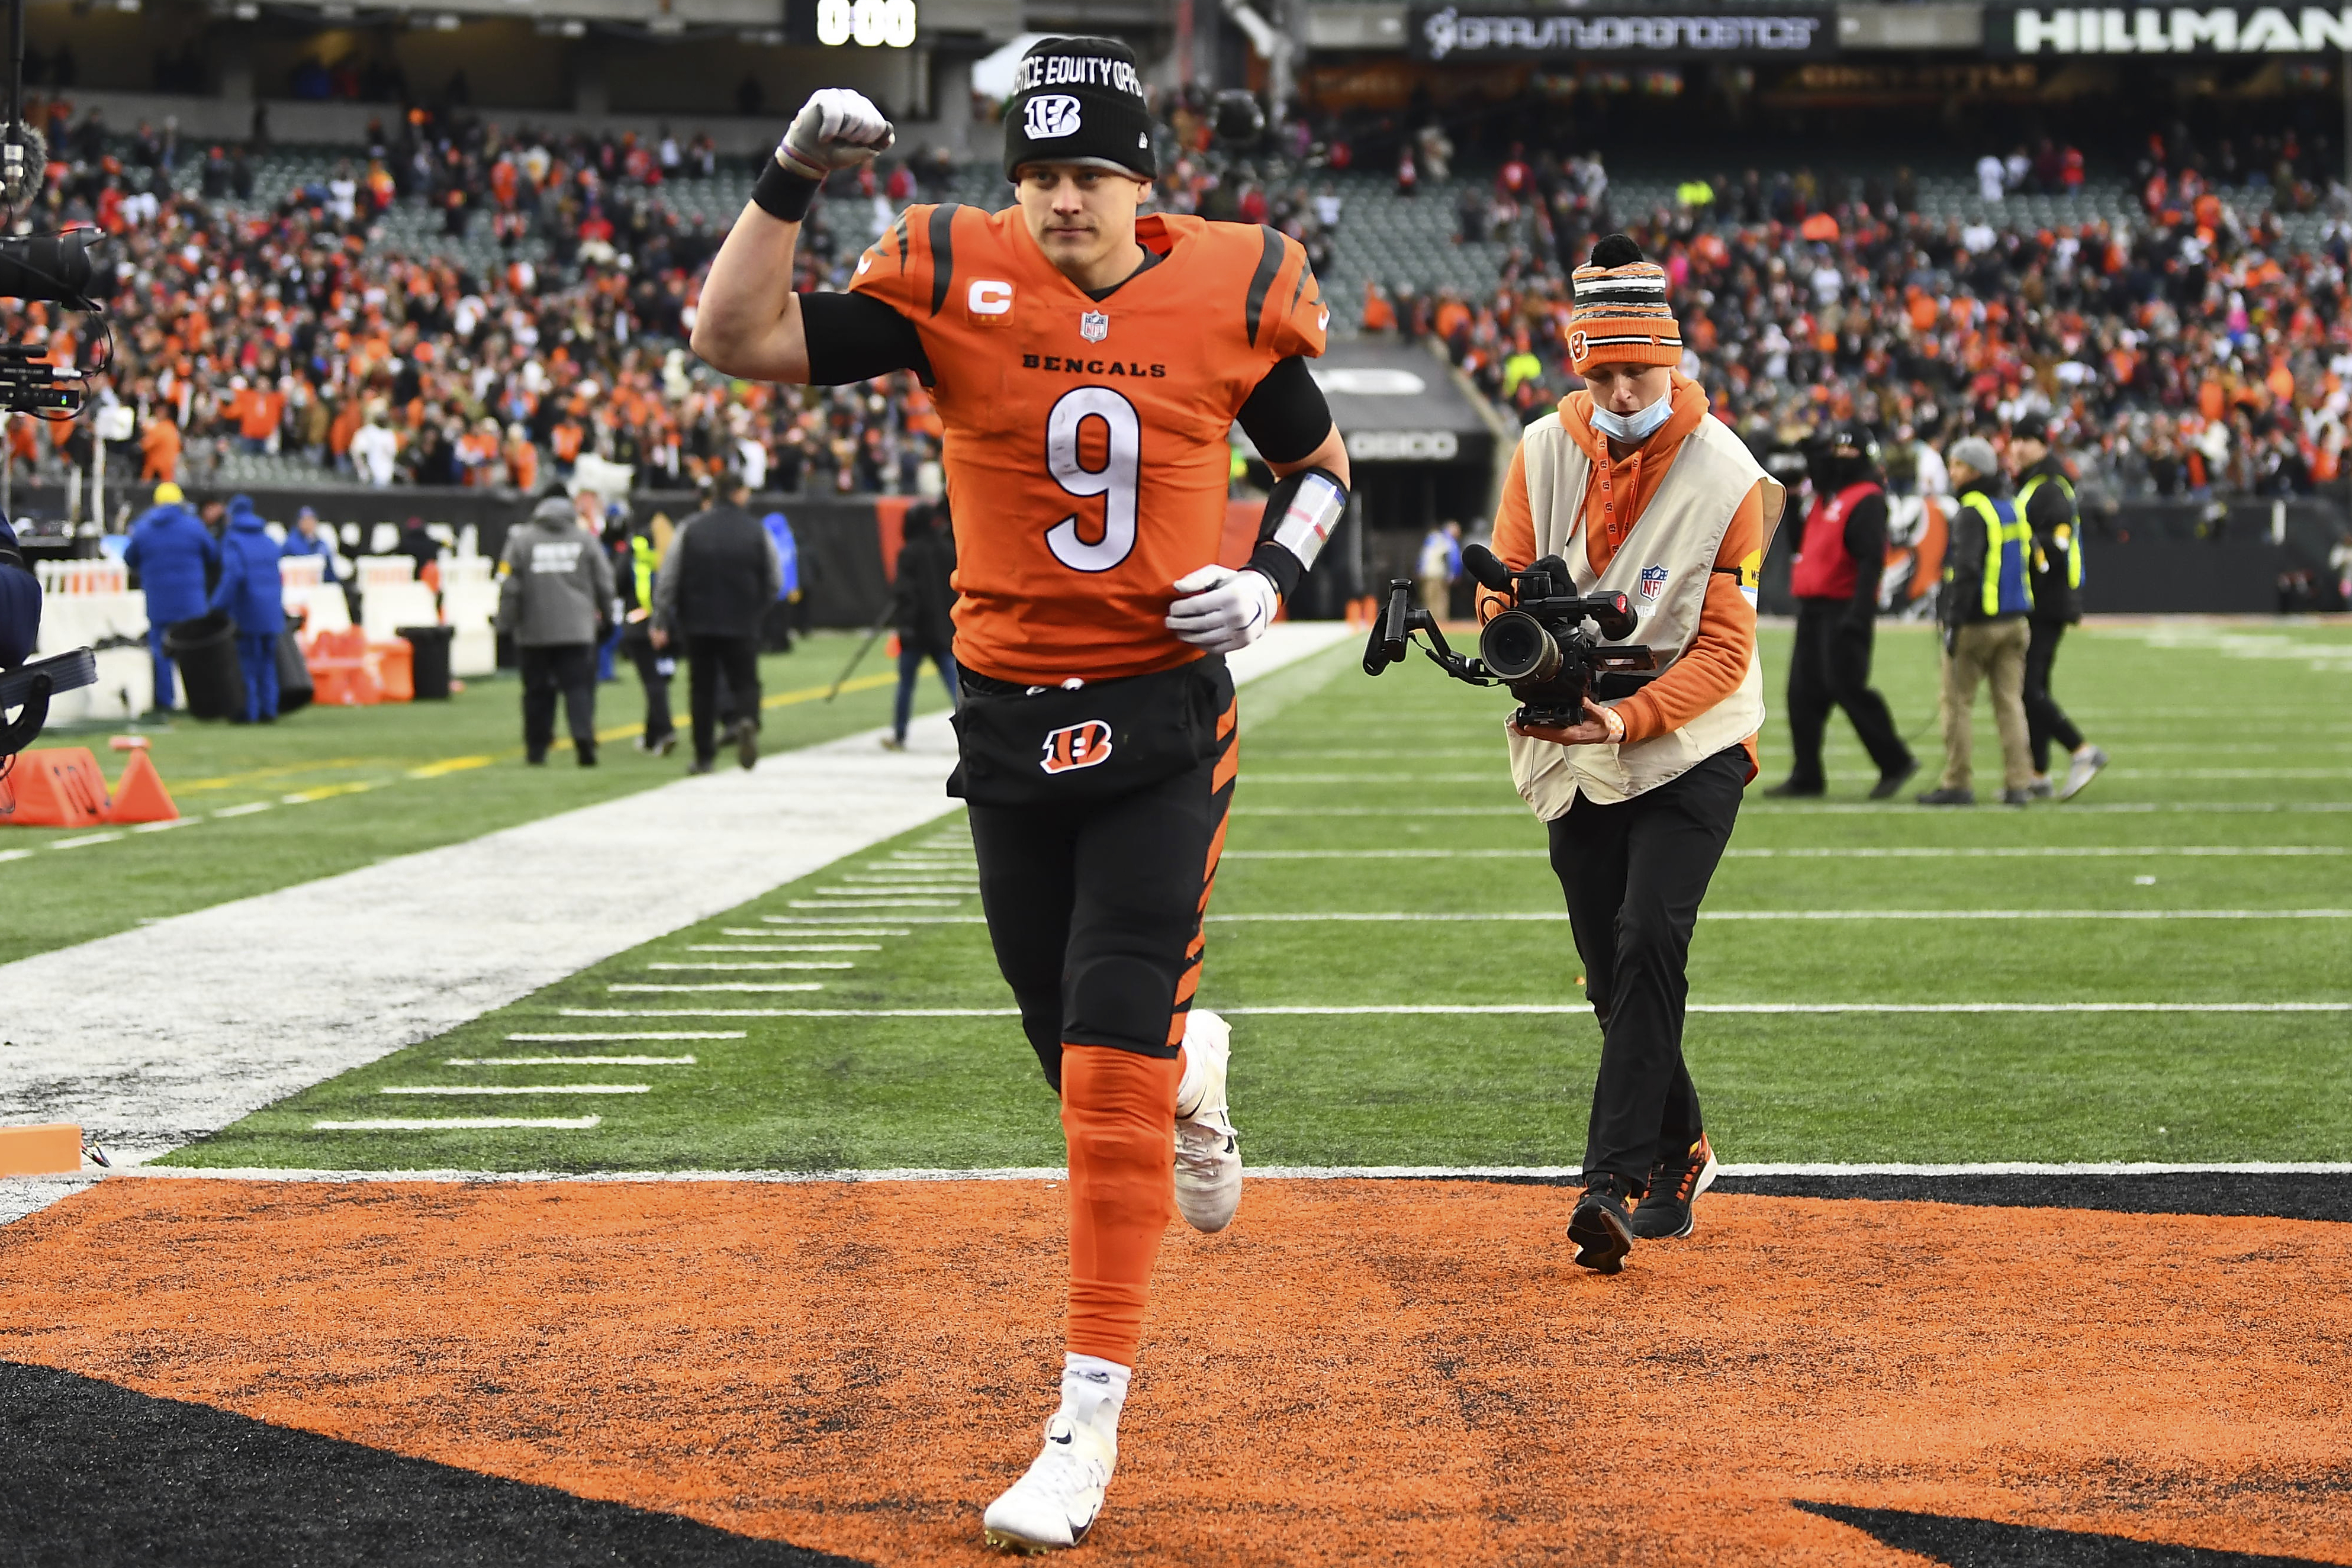 NFL fans flame Joe Burrow after Bengals QB emerges as favorite to